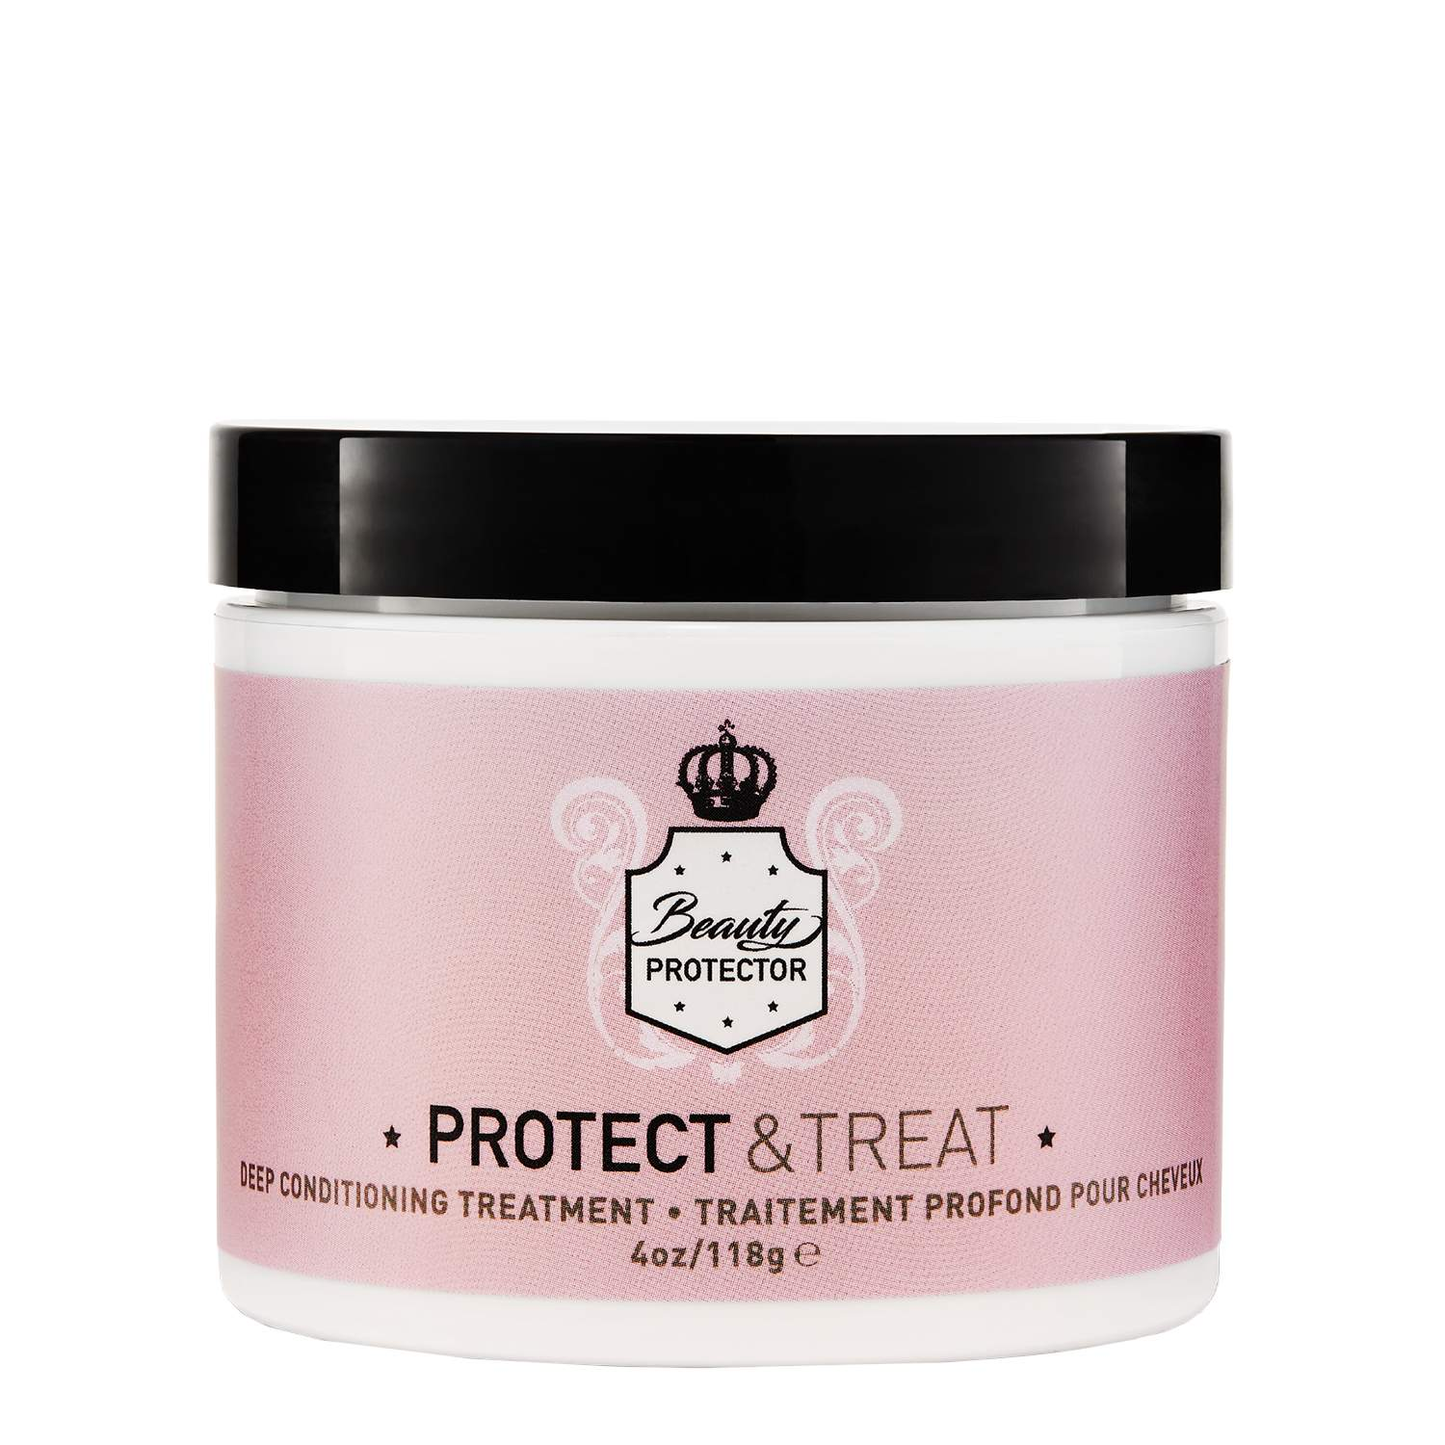 Protect & Treat Mask